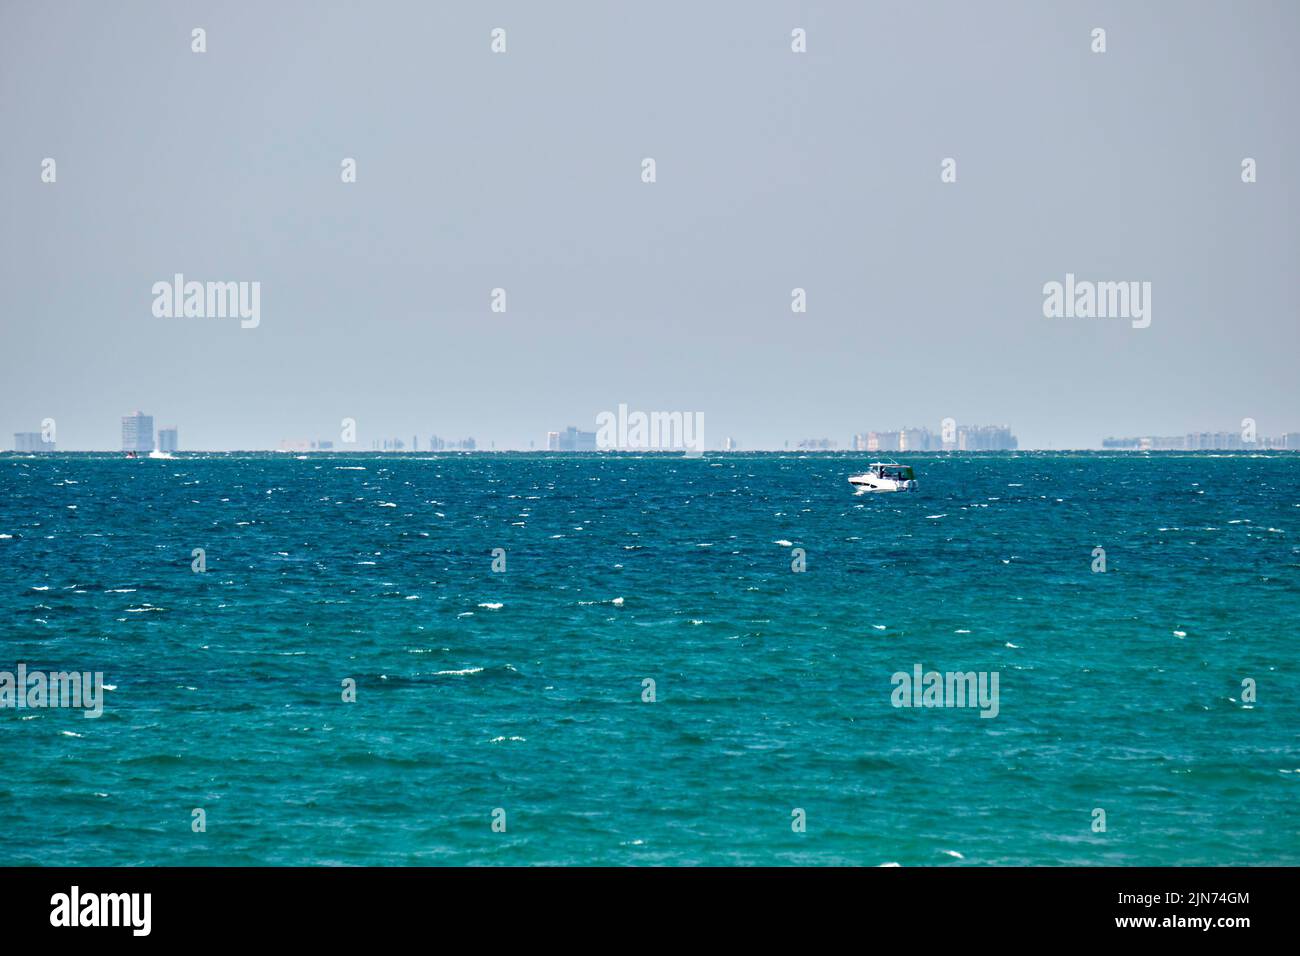 Sea panorama. Small motor boat floats in deap blue bay water under bright blue sky, tall buildings on distant shore Stock Photo